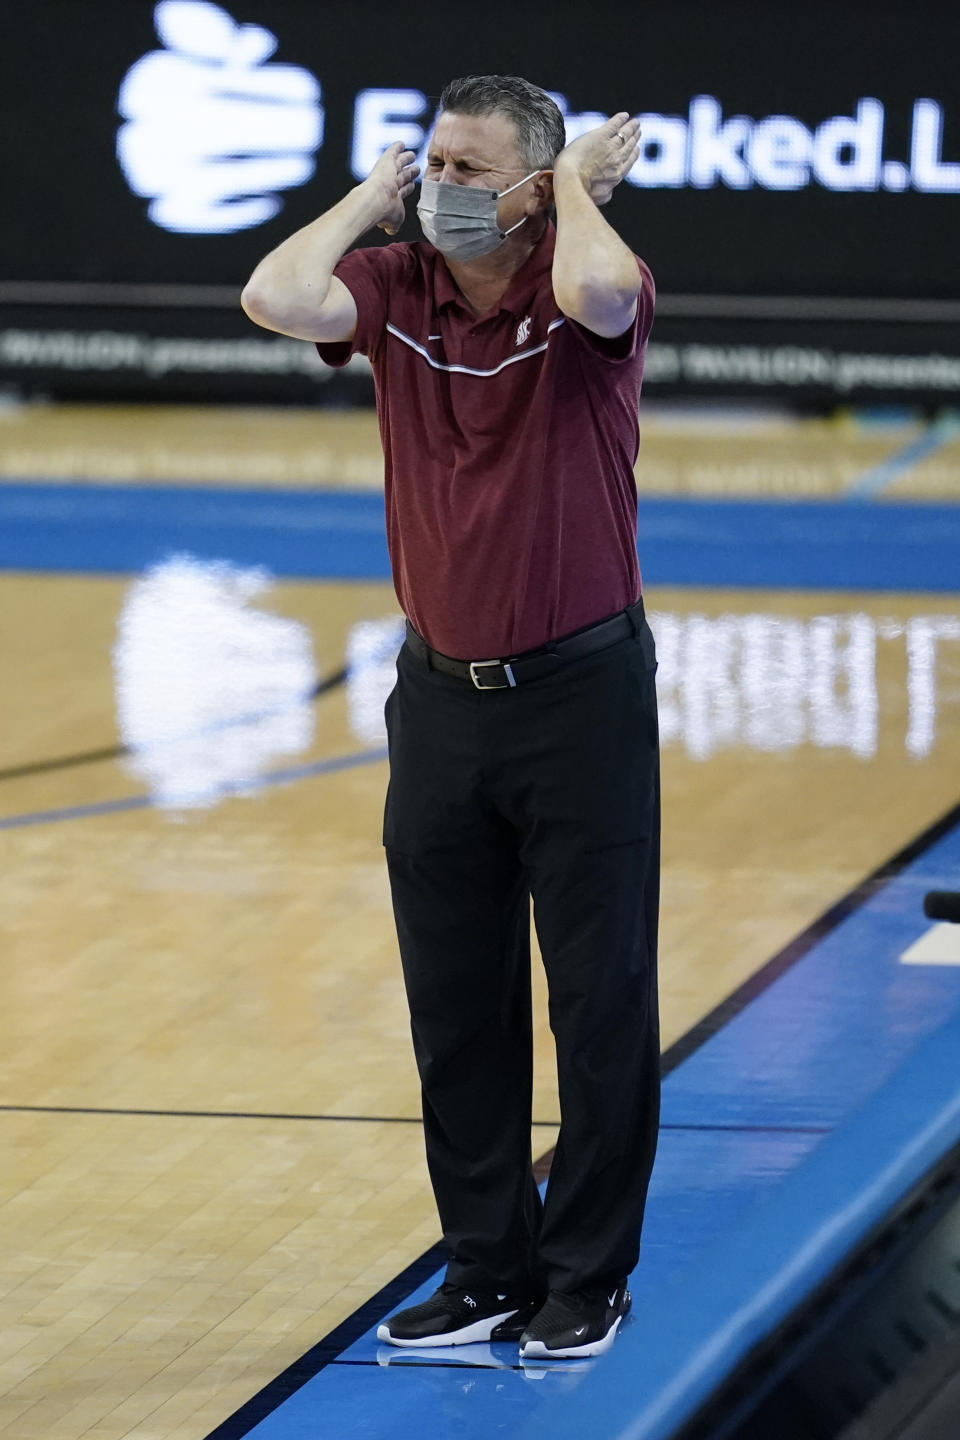 Washington State head coach Kyle Smith yells from the sideline during the first half of an NCAA college basketball game against UCLA, Thursday, Jan. 14, 2021, in Los Angeles. (AP Photo/Ashley Landis)